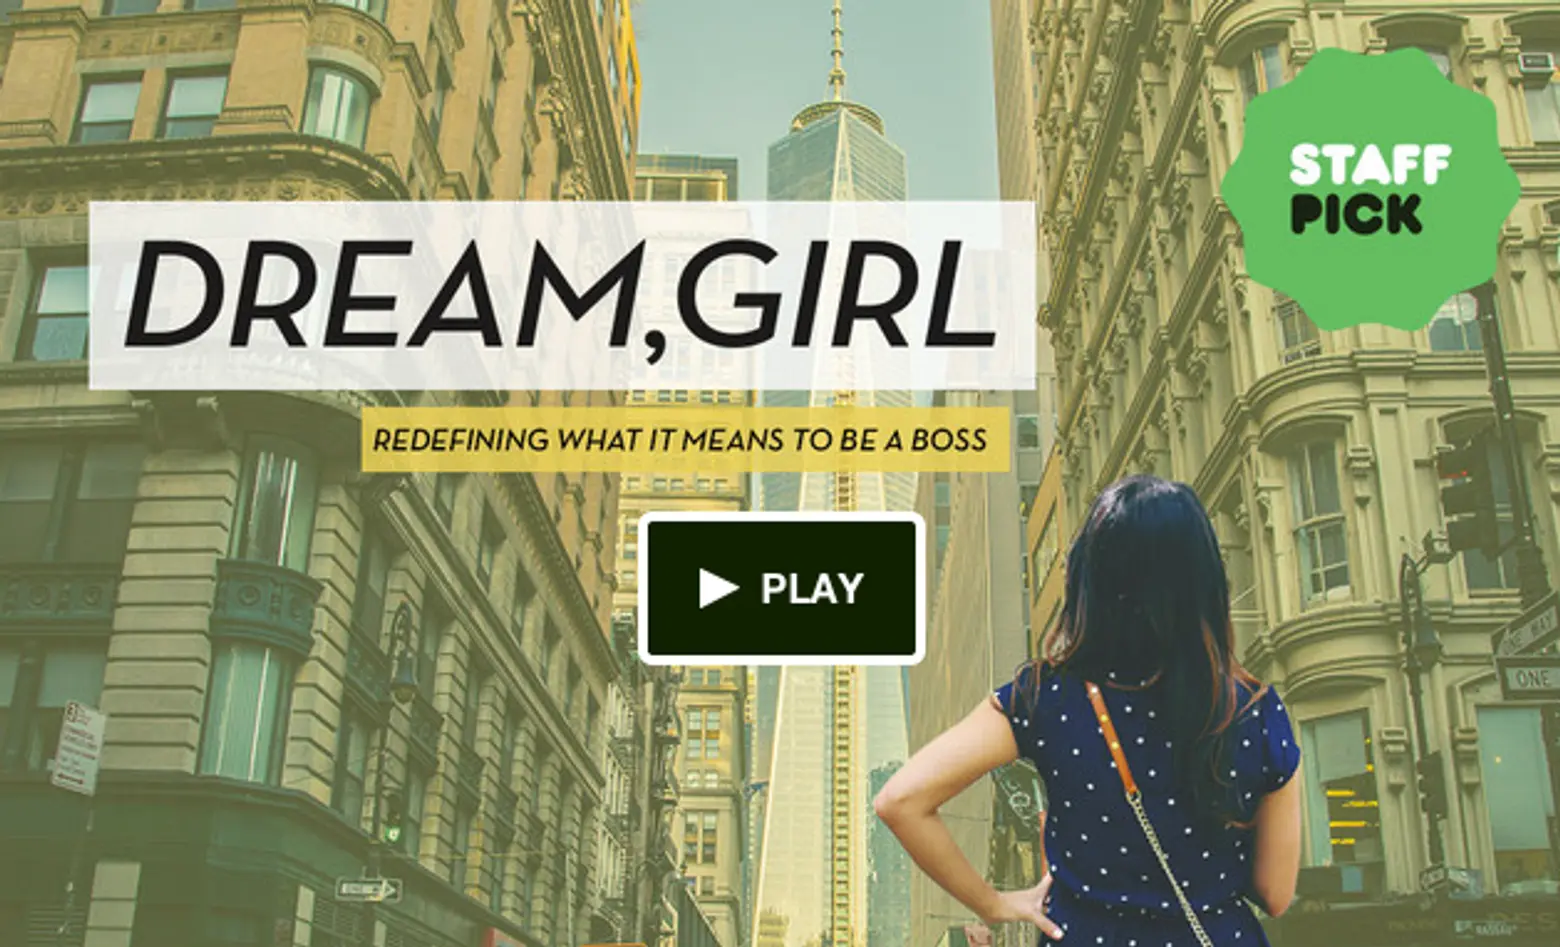 Daily Link Fix: ‘Dream, Girl’ Wants To Change The Image of A Boss; Upcycled Bicycle Seats Transformed Into Mini Green Spaces